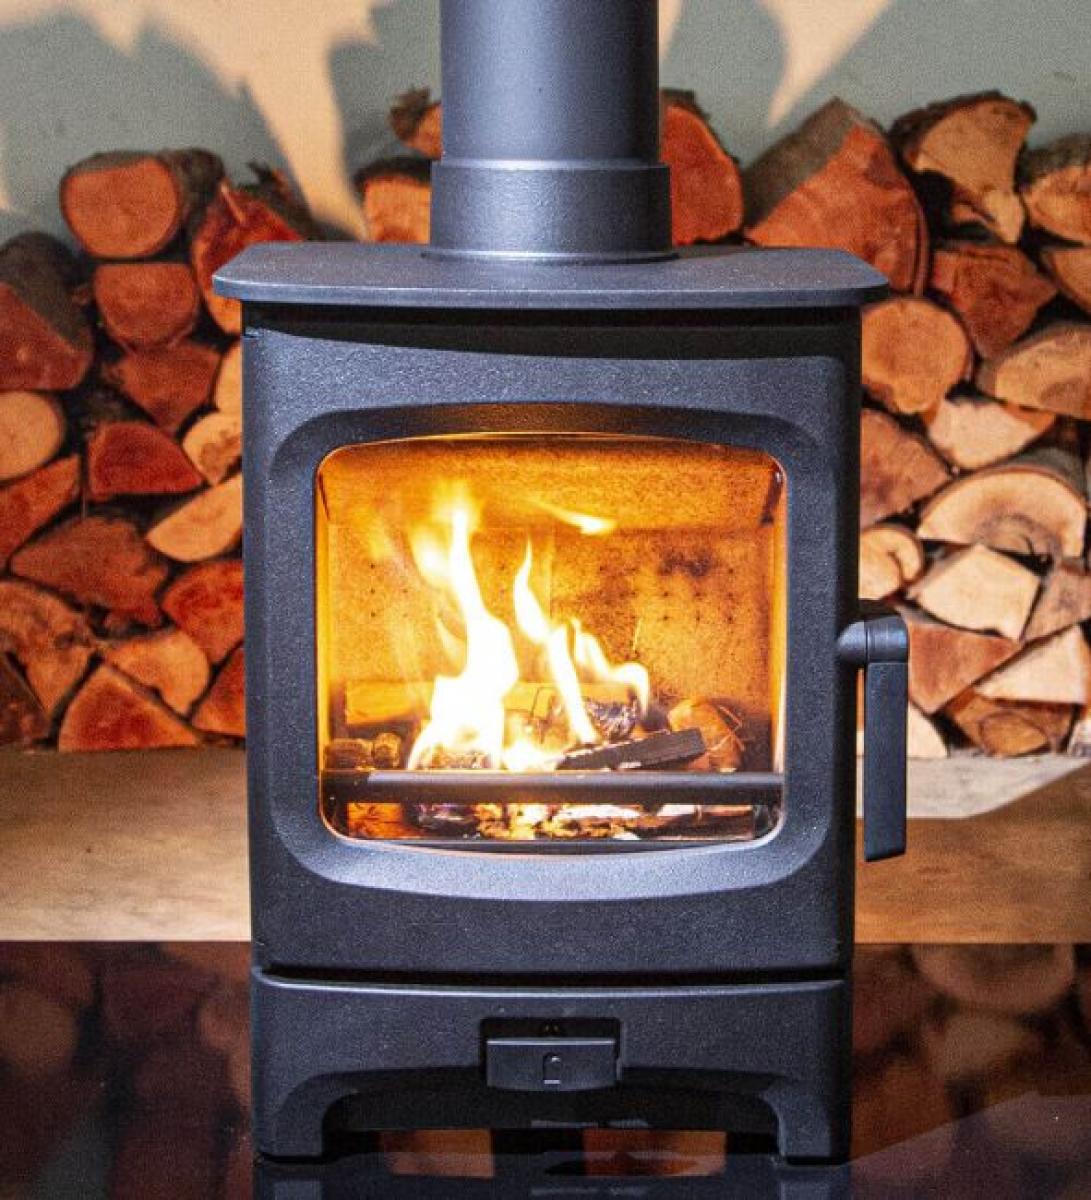 Wood Heater for Tiny Homes - The Charnwood Aire 3 